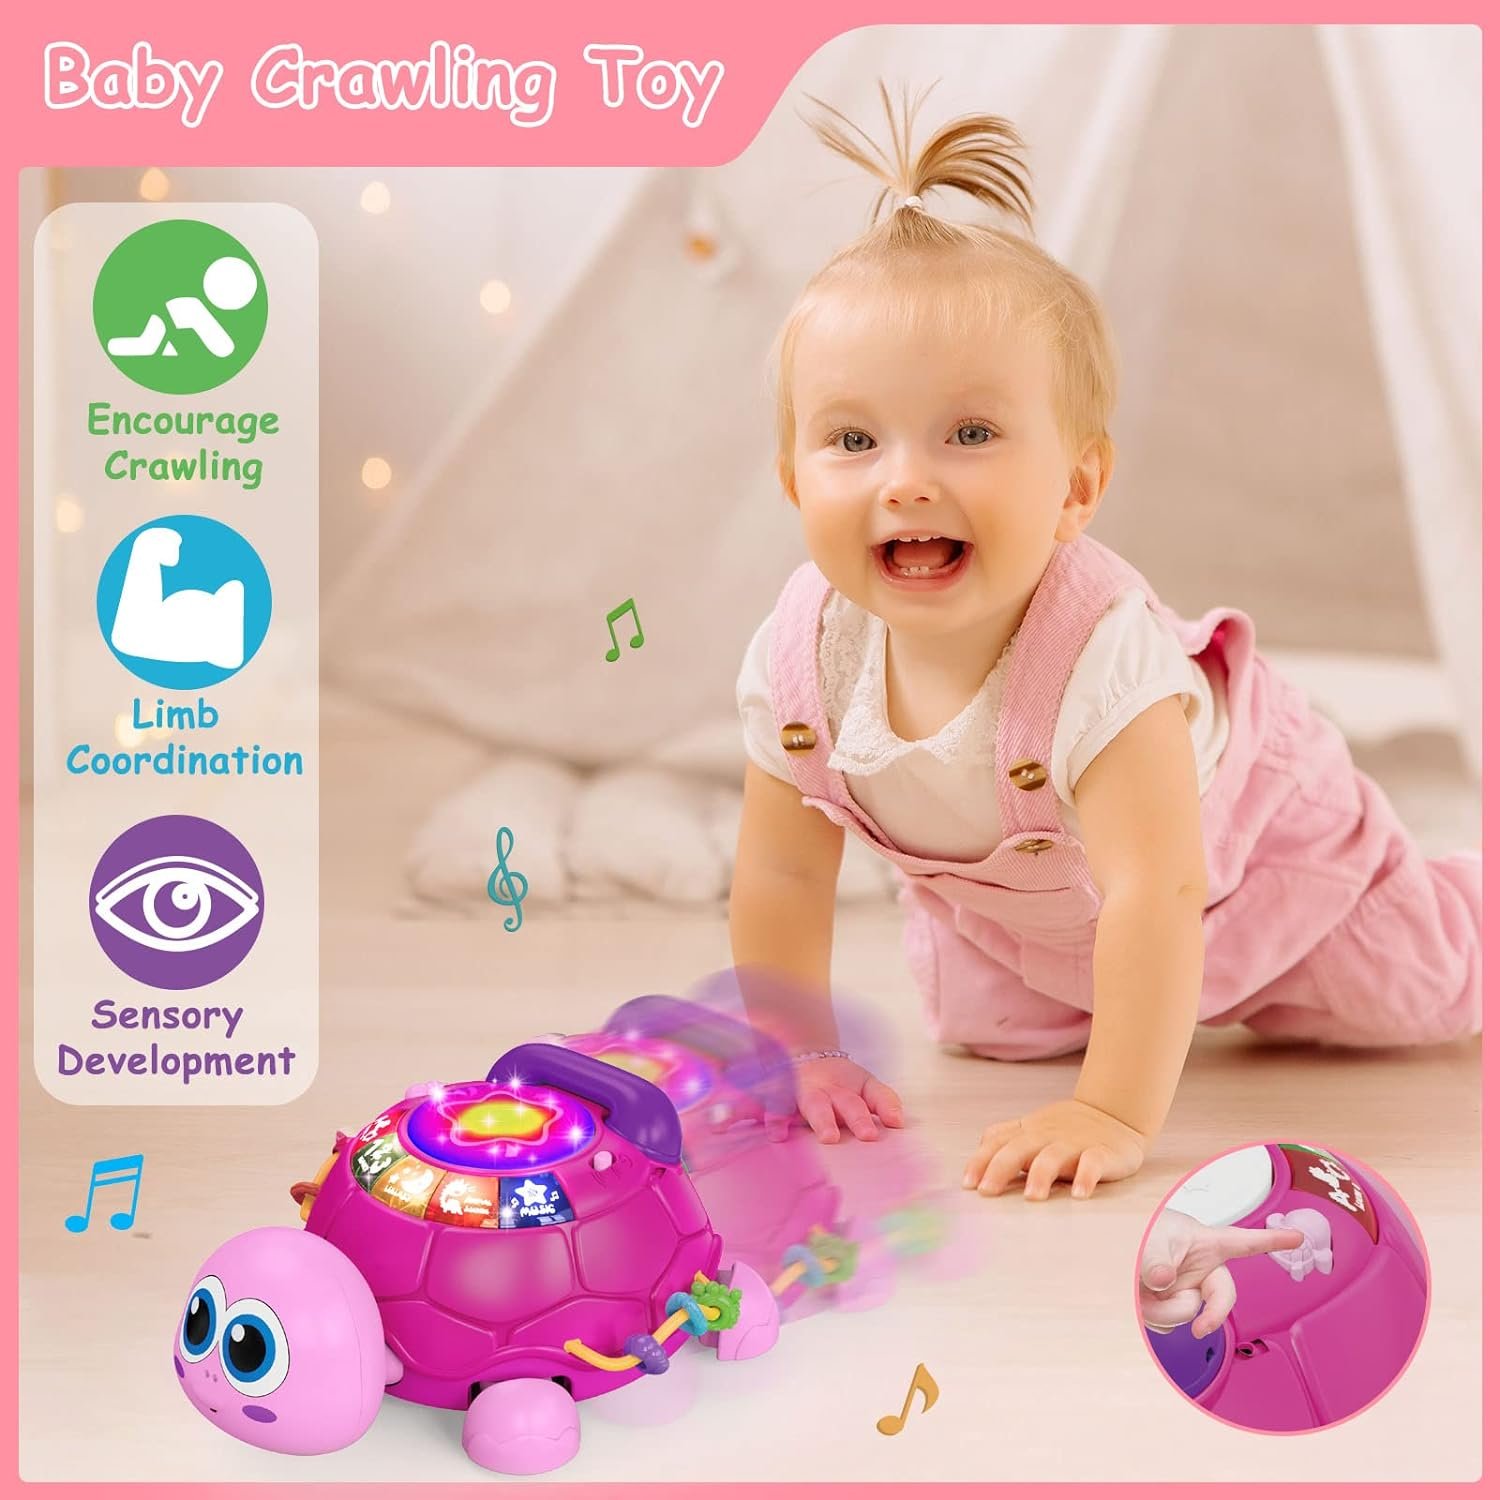 Hanayo Baby Toys 6 to 12 Months，Musical Turtle Crawling Baby Girl Toys for 12-18 Months，Infant Early Learning Educational Toy，Baby Girl Gift Essentials for Newborn 7 8 9 11+ Months 1-2 Year Old(Pink)